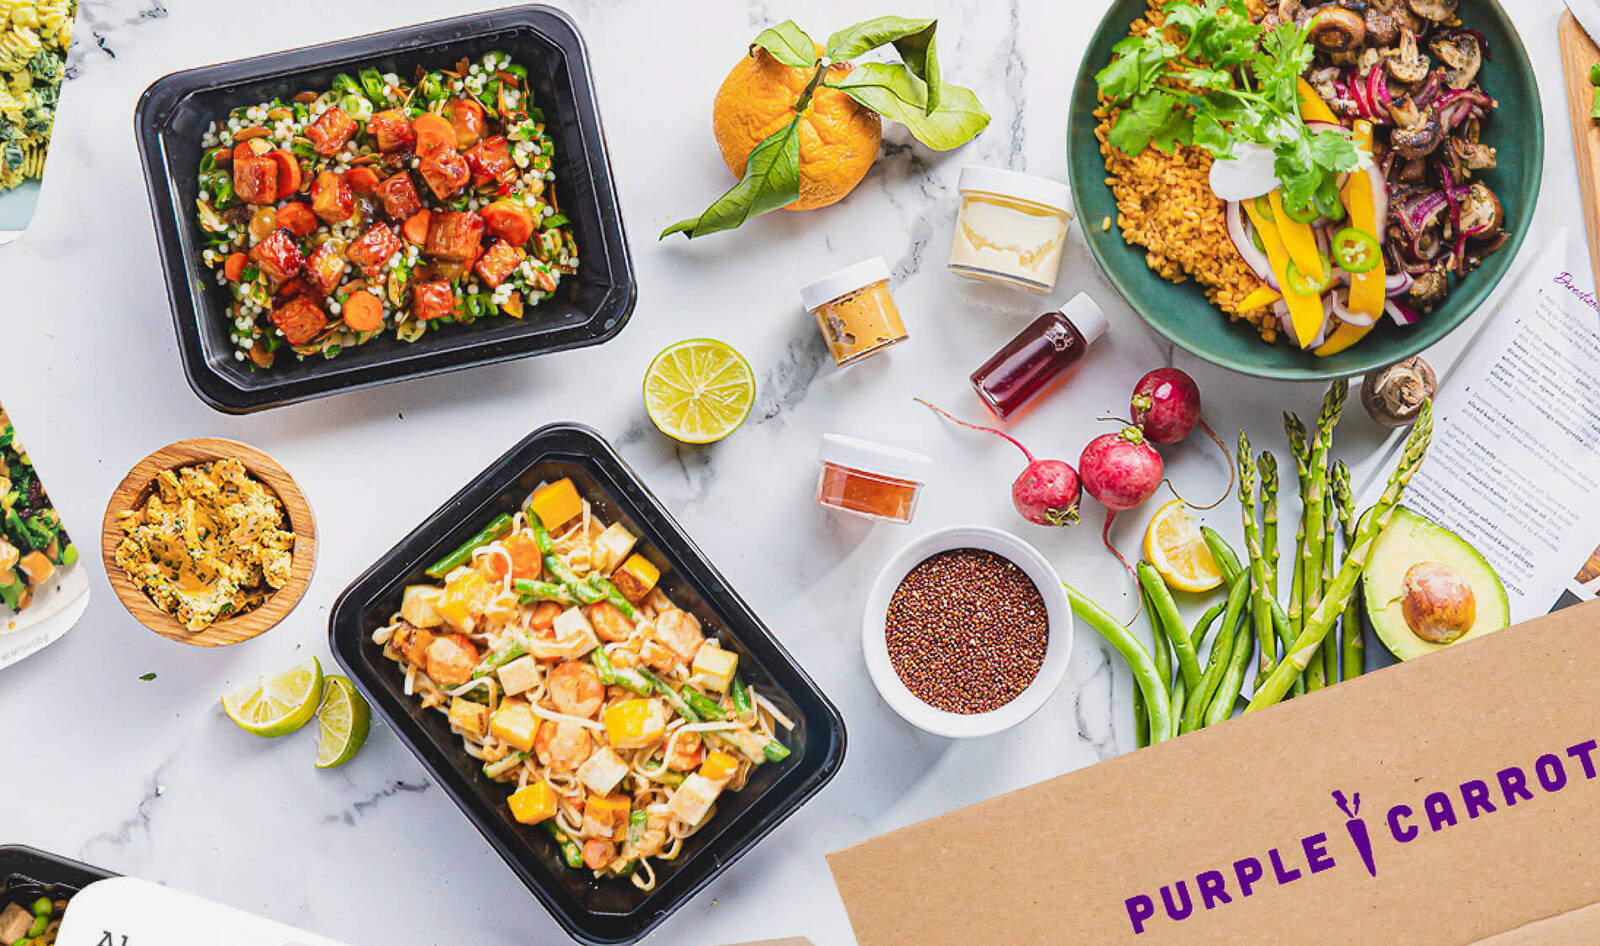 The Guide to Plant-Based Meal Delivery Subscriptions: How to Pick the Best Option